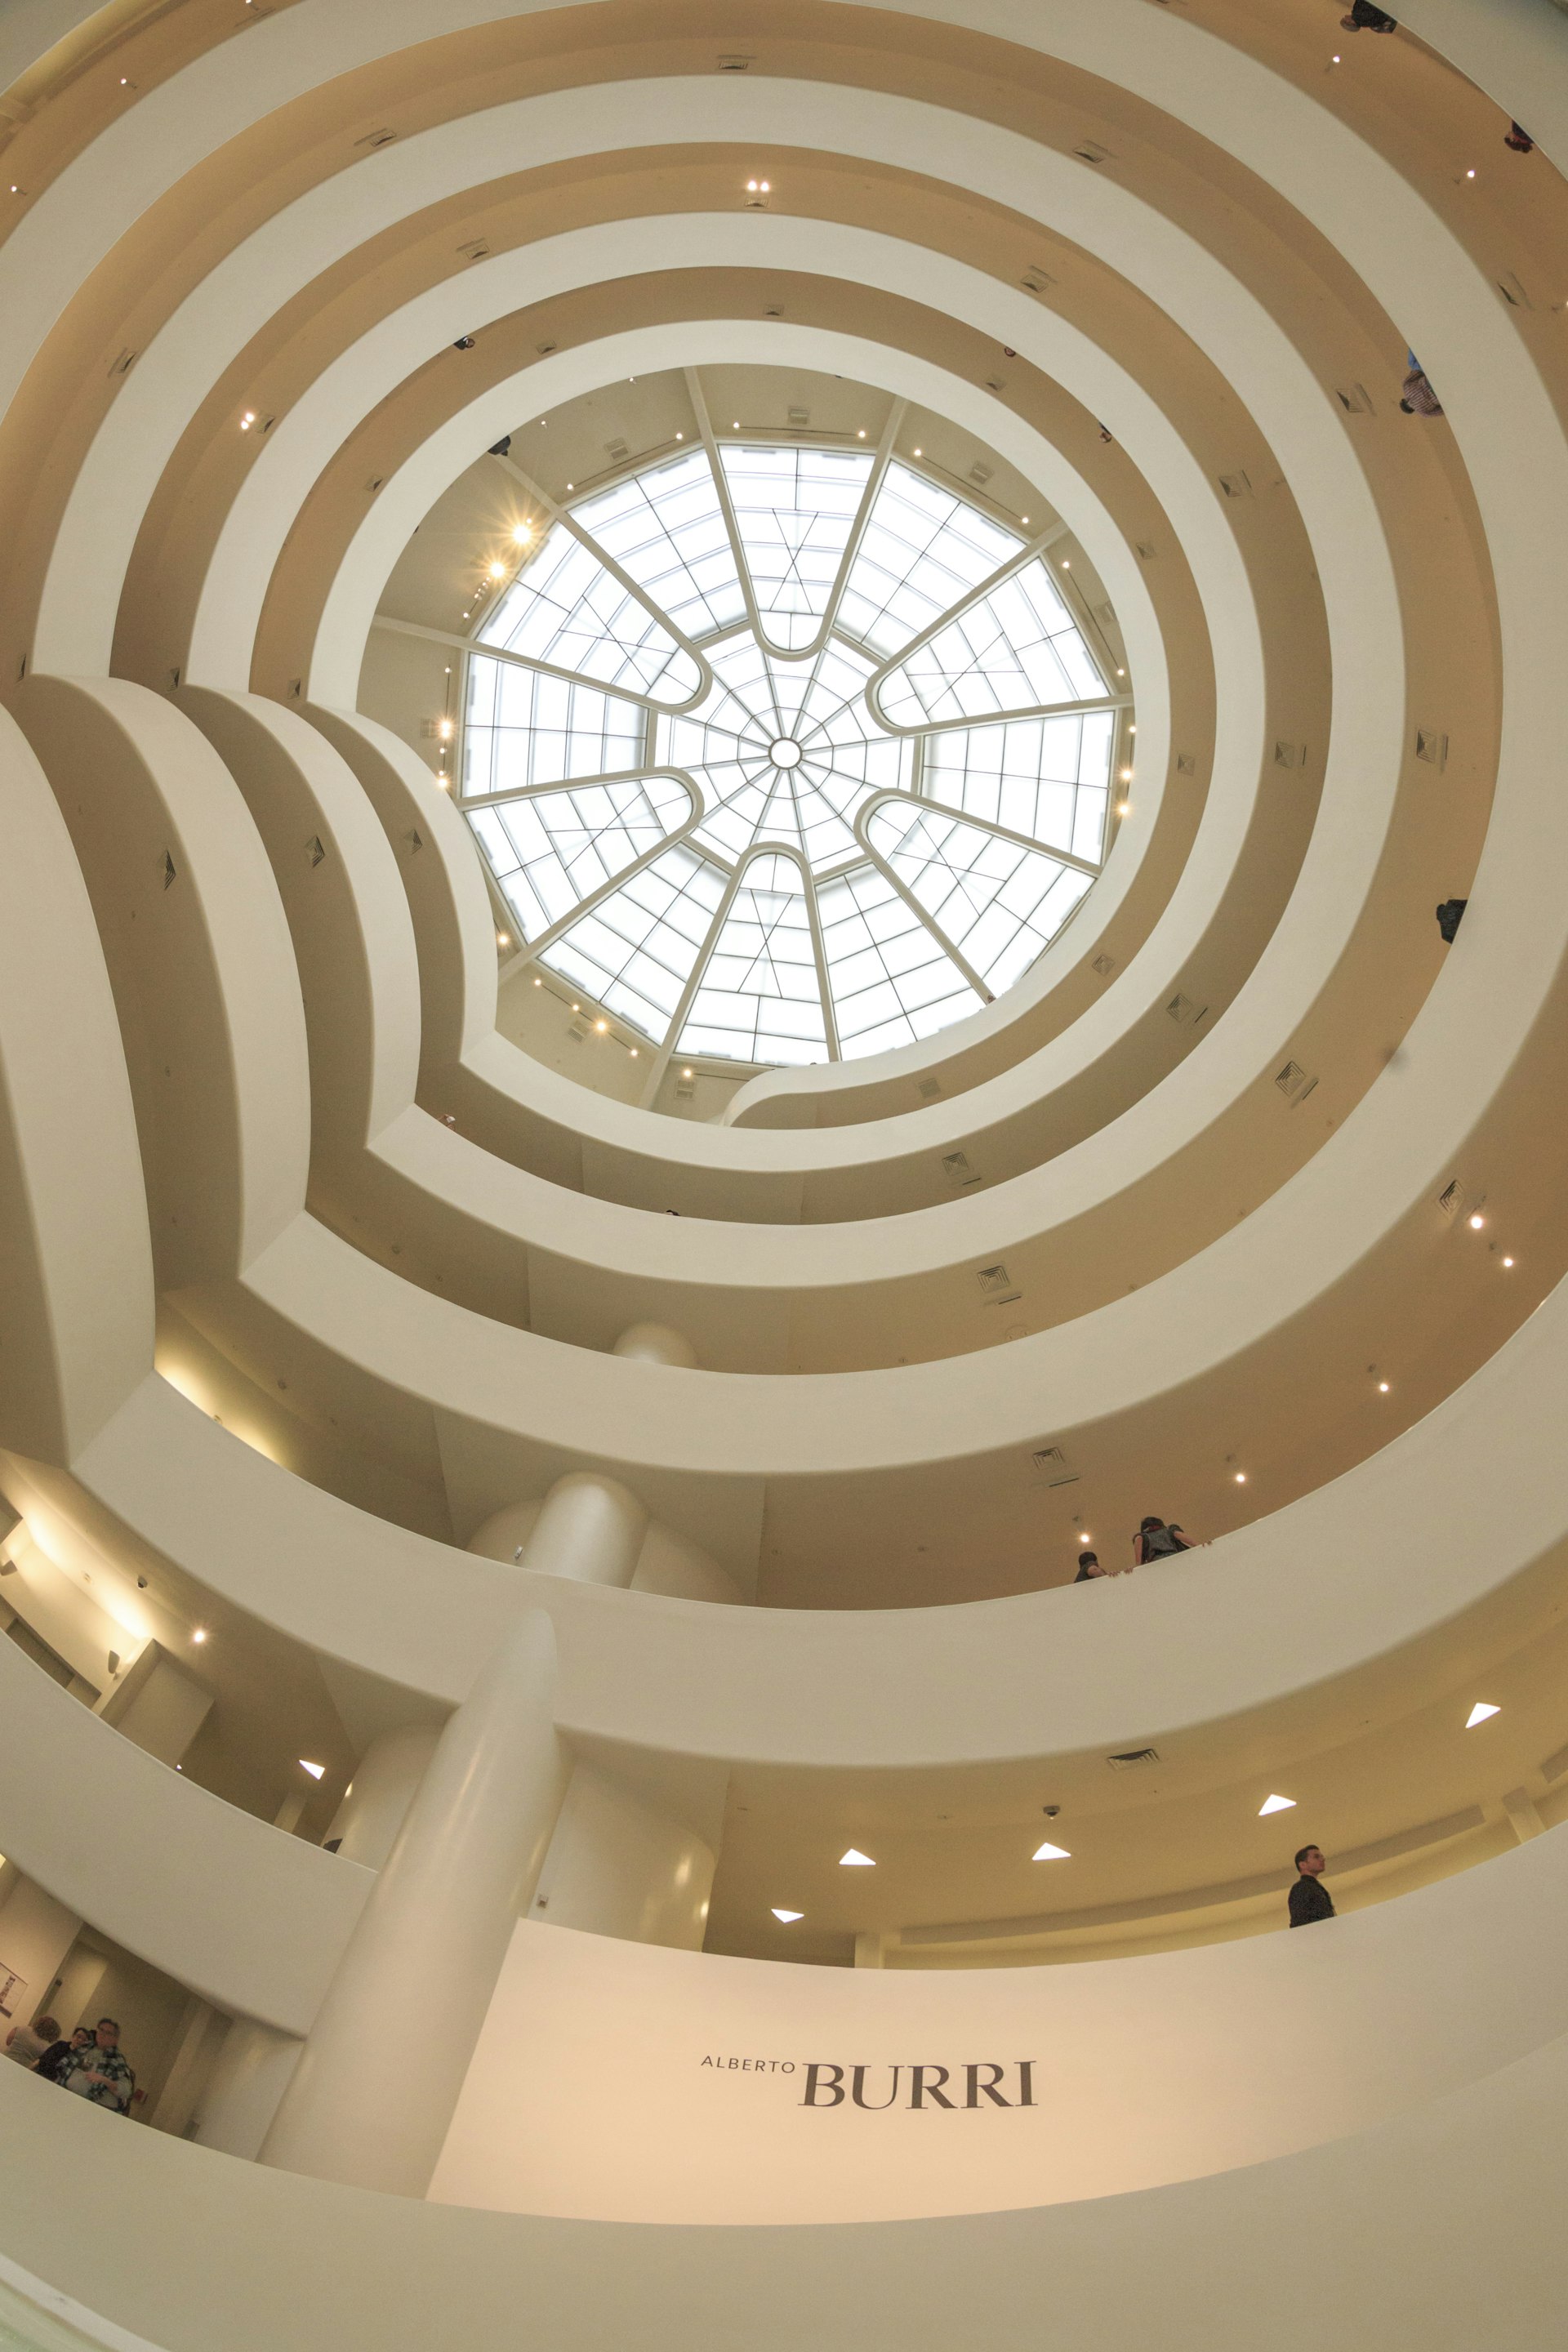 View of the central staircase and the window dome at the Guggenheim Museum in New York City.  